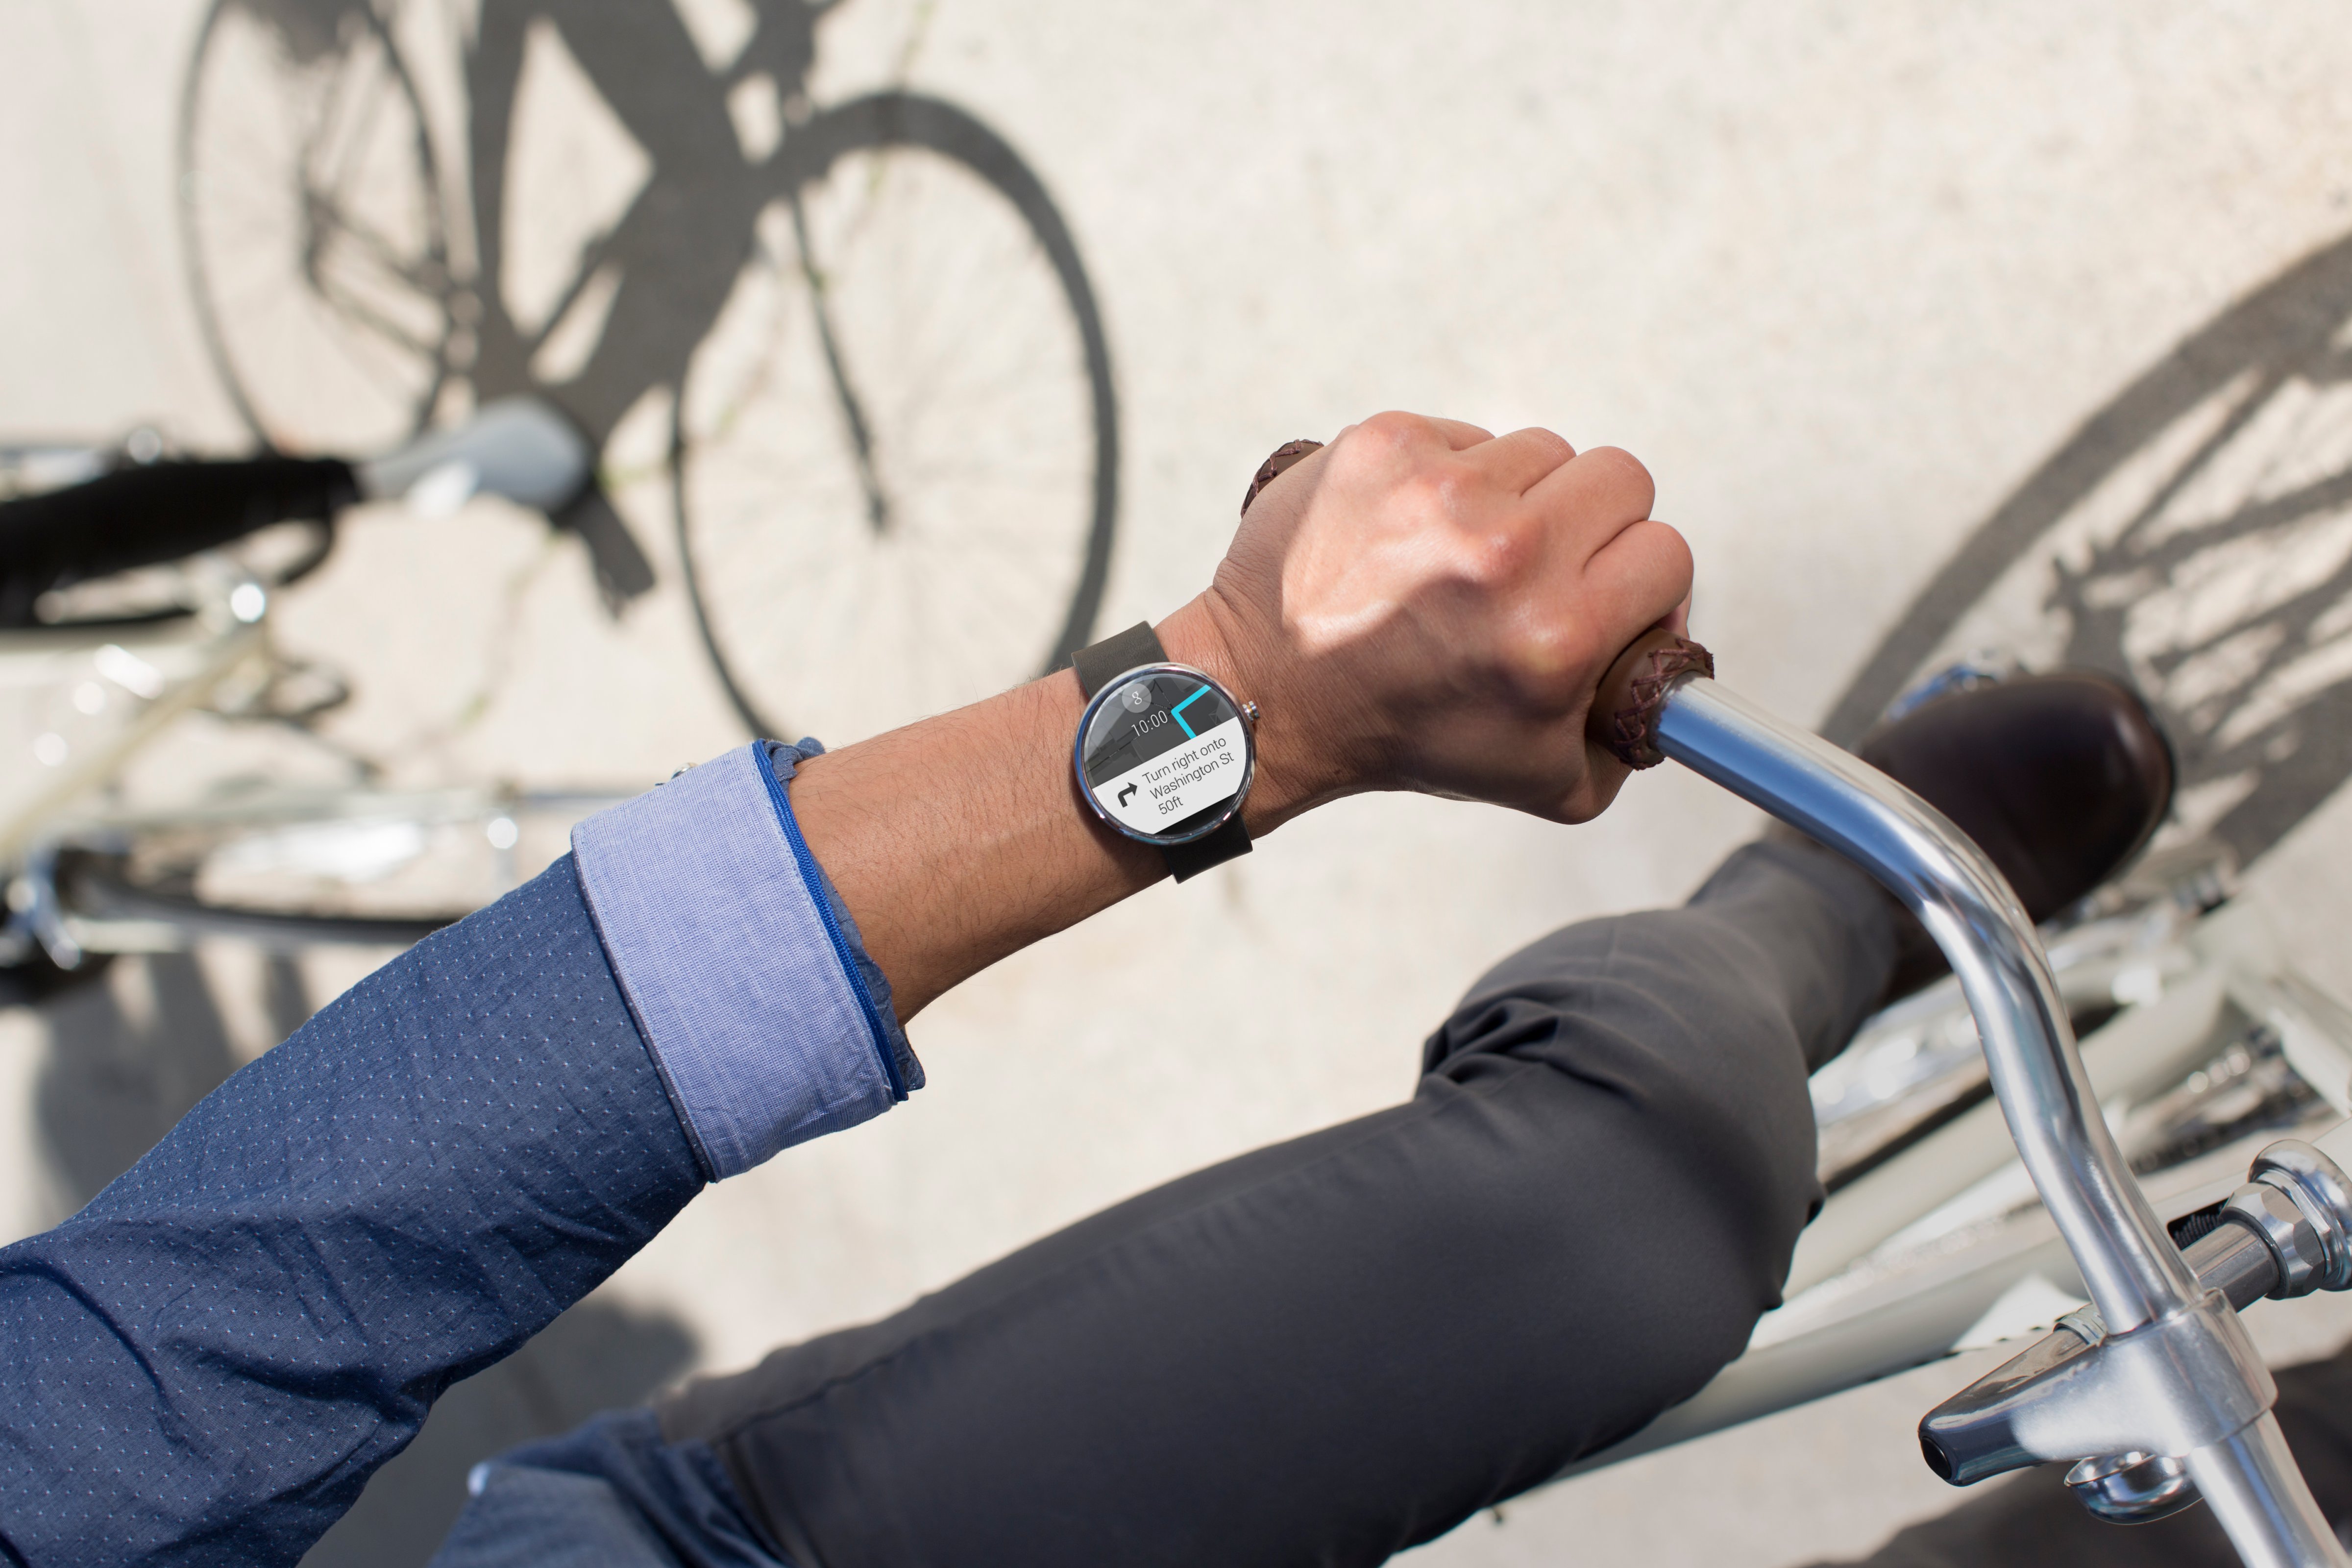 A press handout photo shows Motorola's Moto 360 watch, powered by Android Wear, displaying a map. (Motorola)